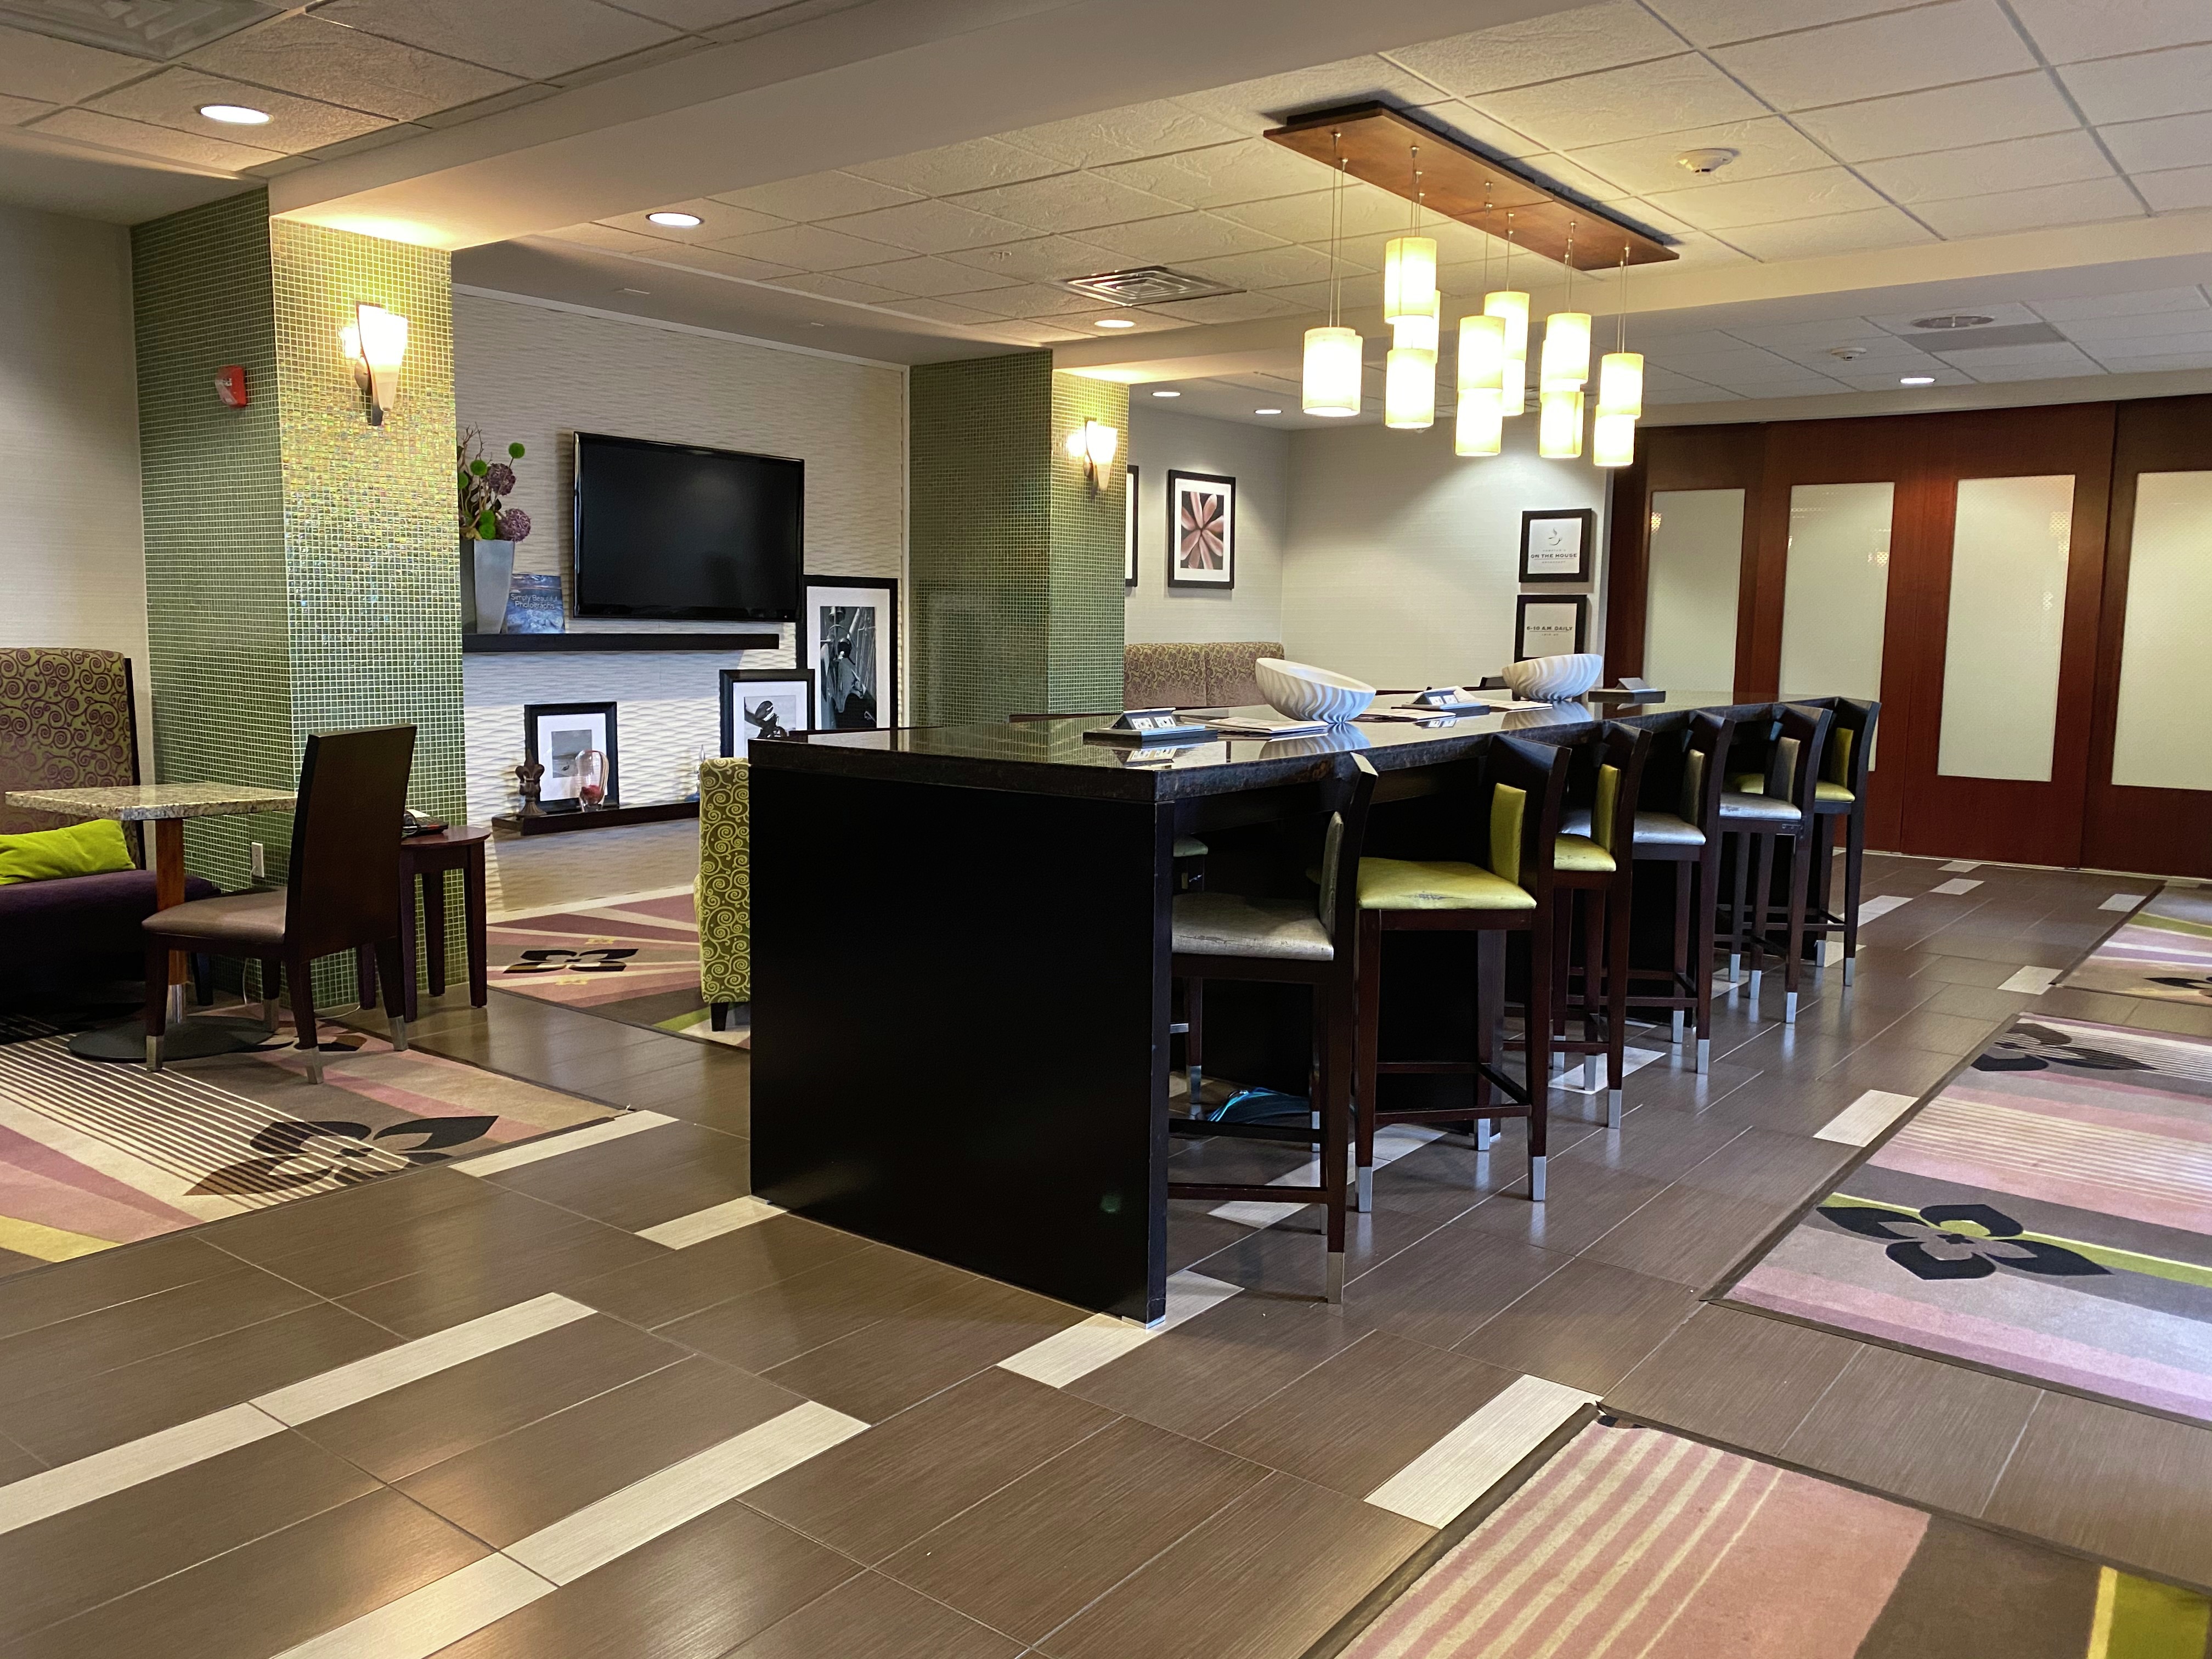 Lobby Bar Area with Stools, Tall Table and Wall Mounted TV